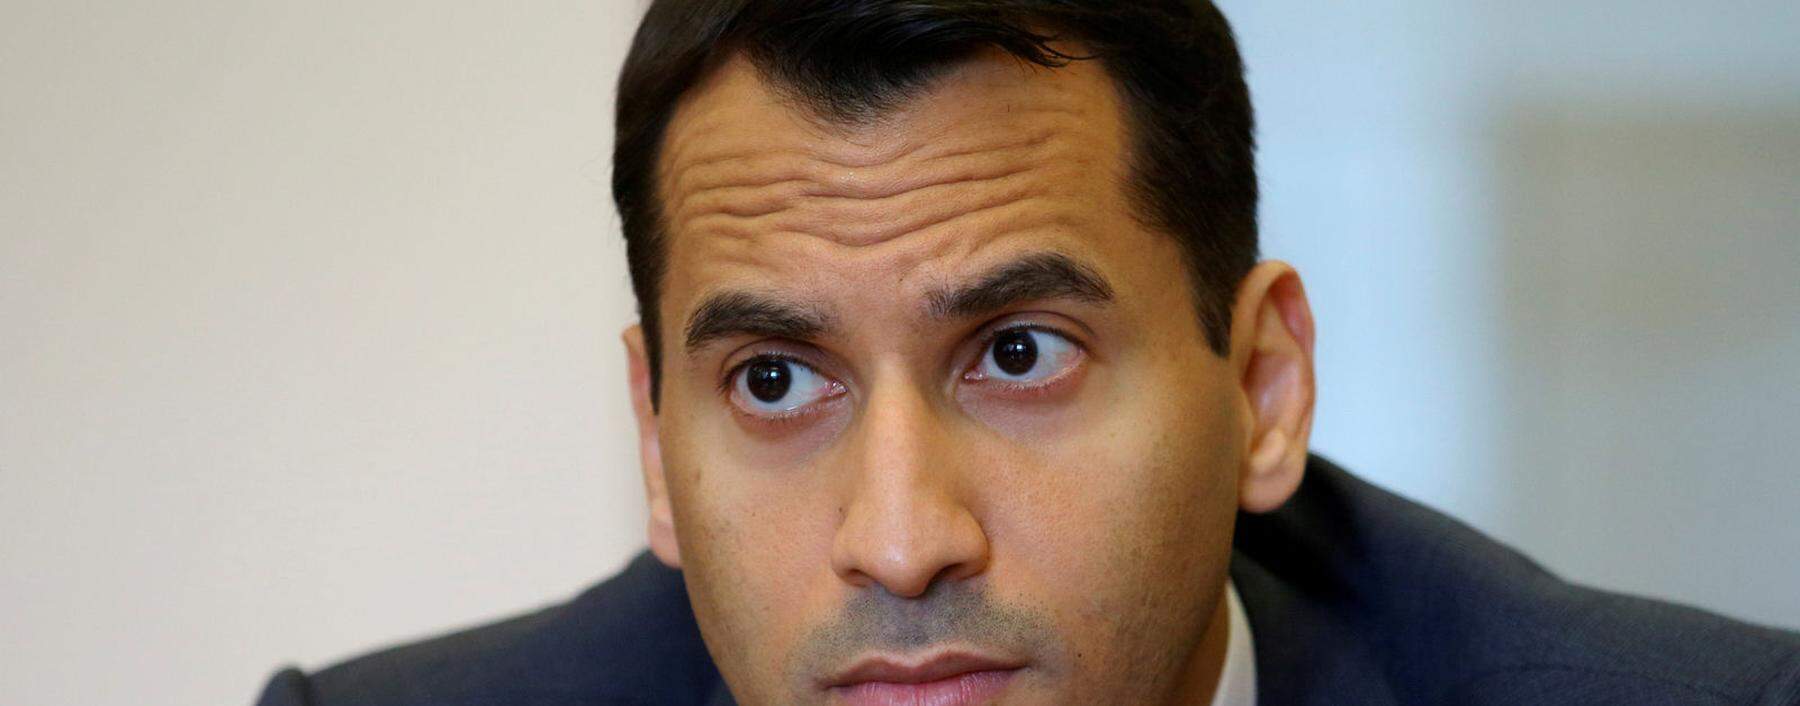 FILE PHOTO: Chief Financial Officer Abuzaakouk of Austrian bank BAWAG PSK listens during a Reuters interview in Vienna